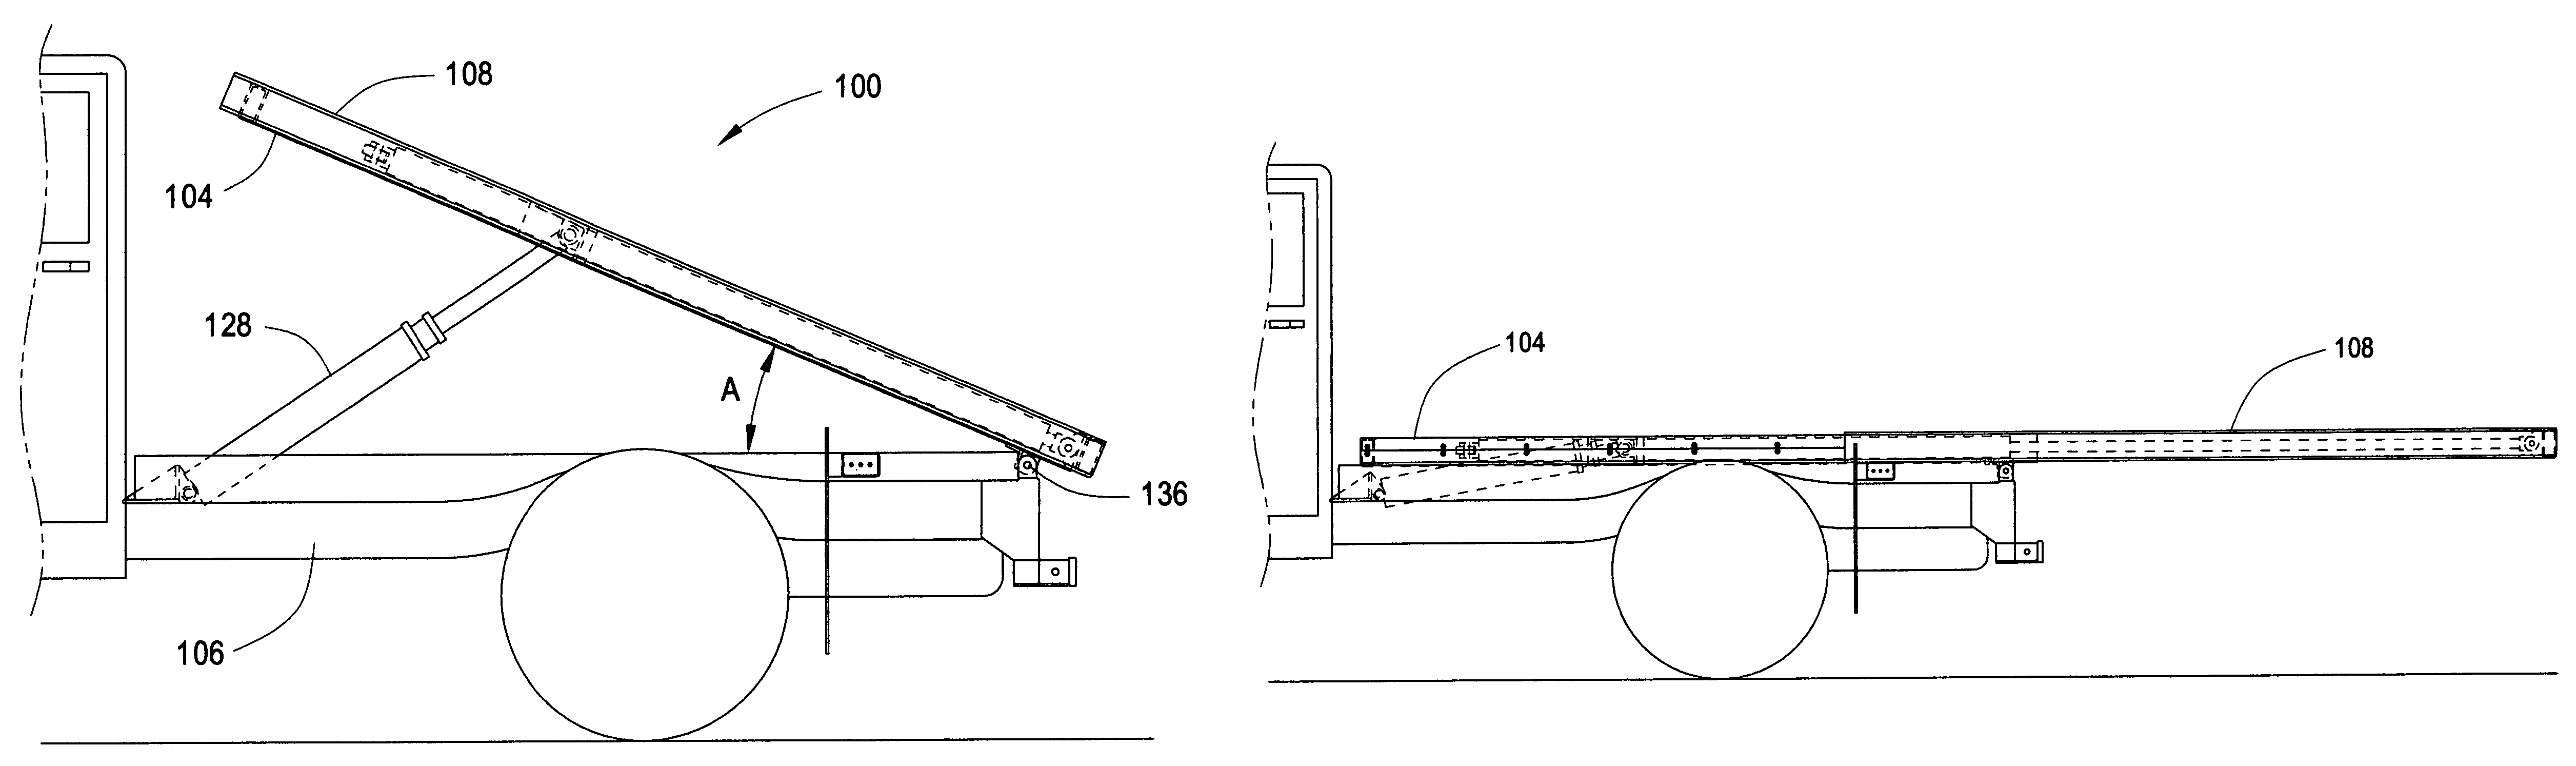 Apparatus for a vehicle for dumping and providing ground access